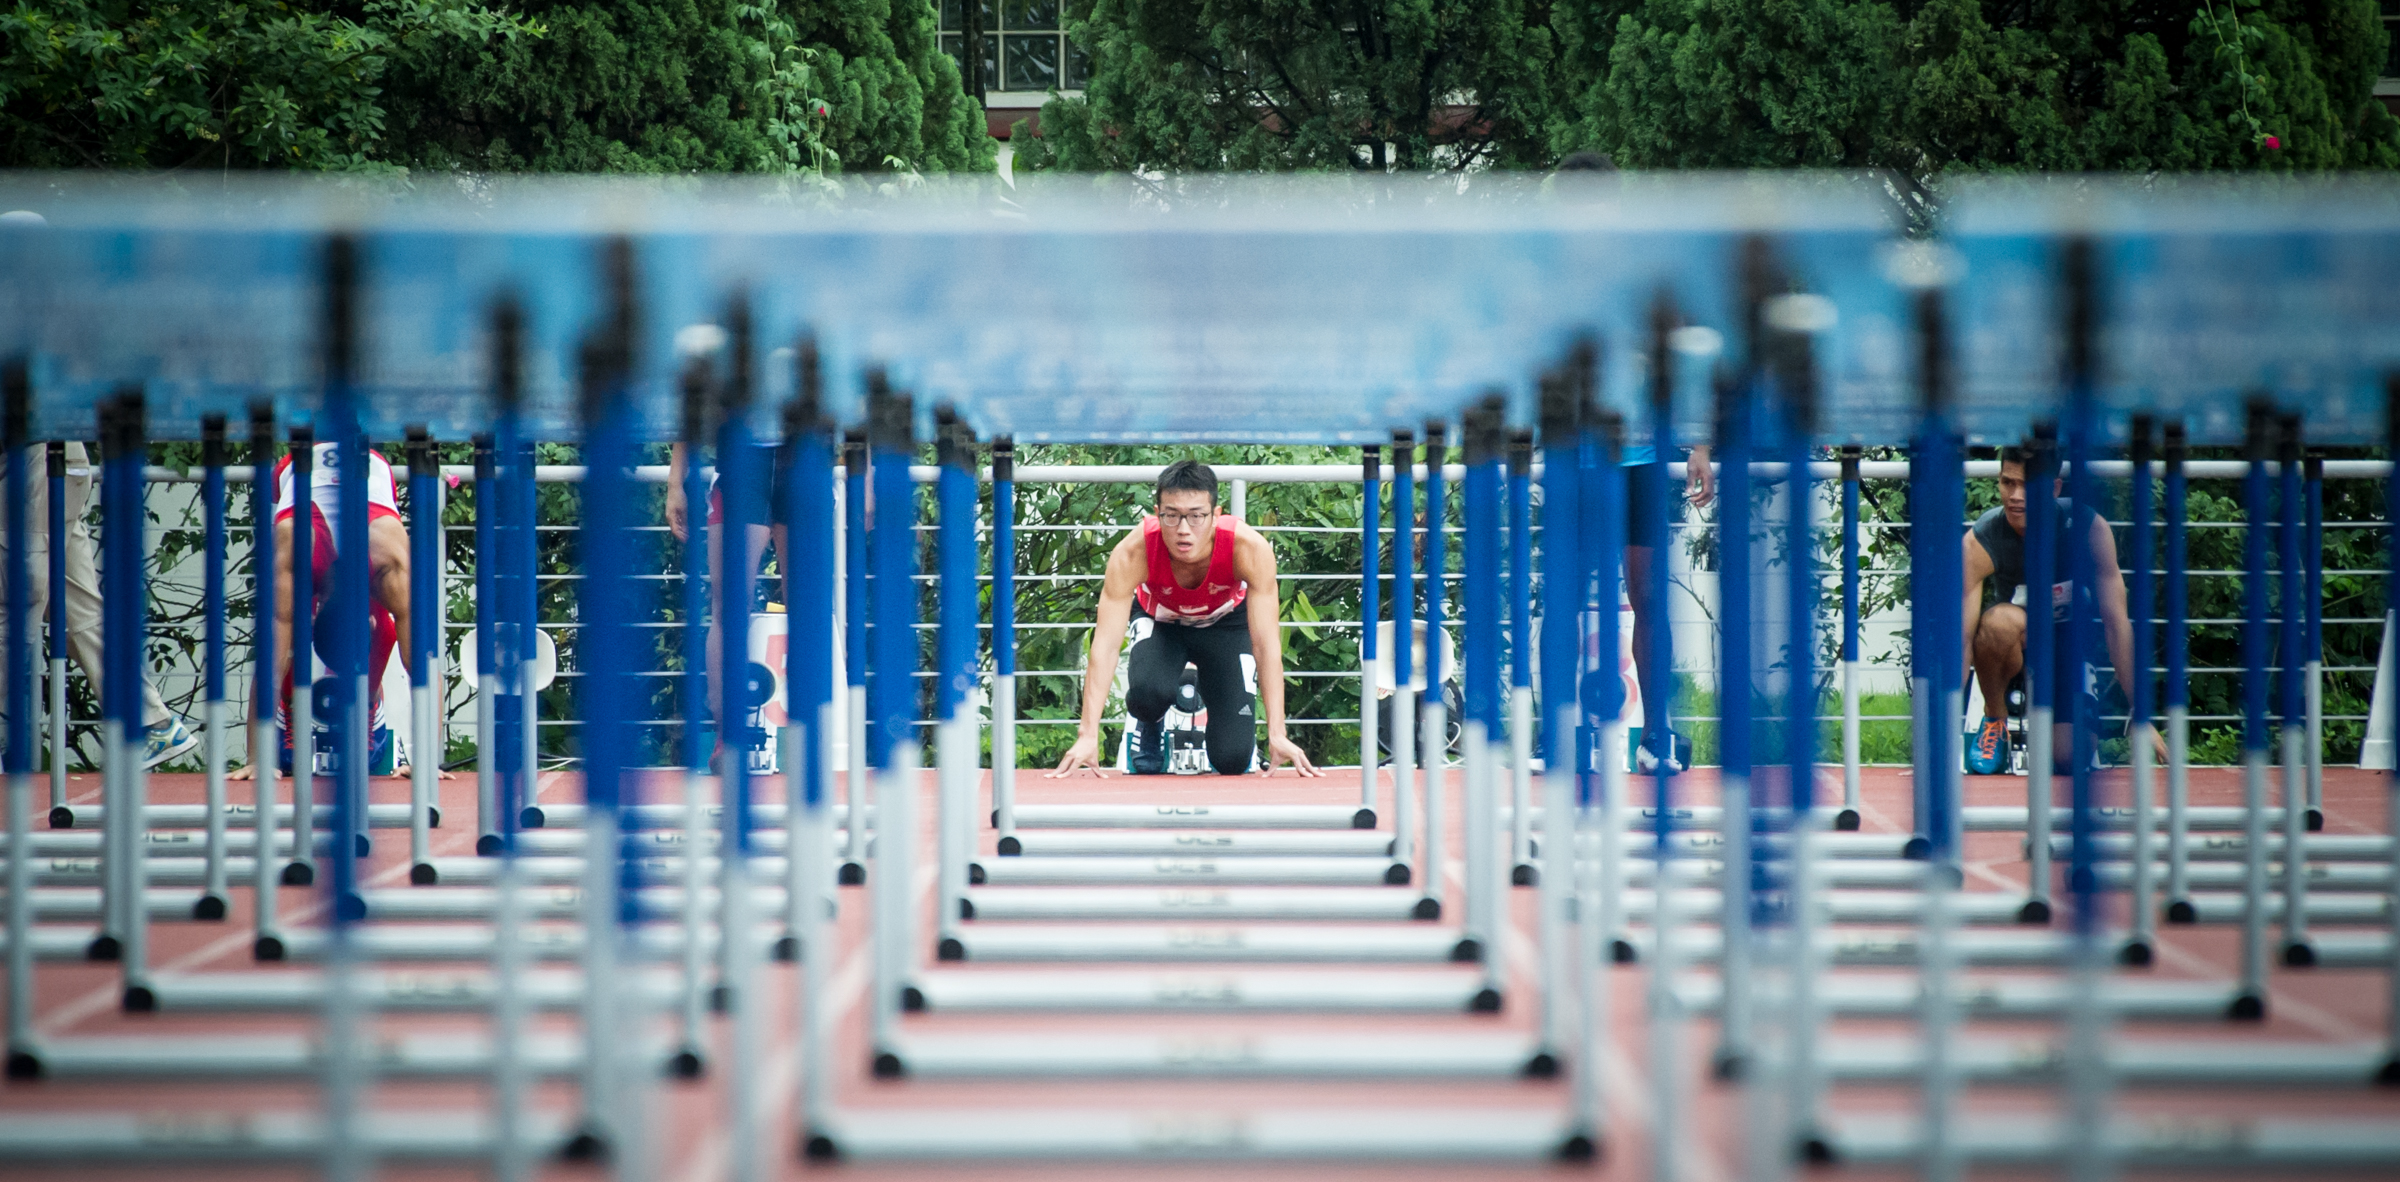 A Singaporean hurdler looks through the hurdles during the 110m hurldes competition of the ASEAN University Games at the Chua Chu Kang Stadium.